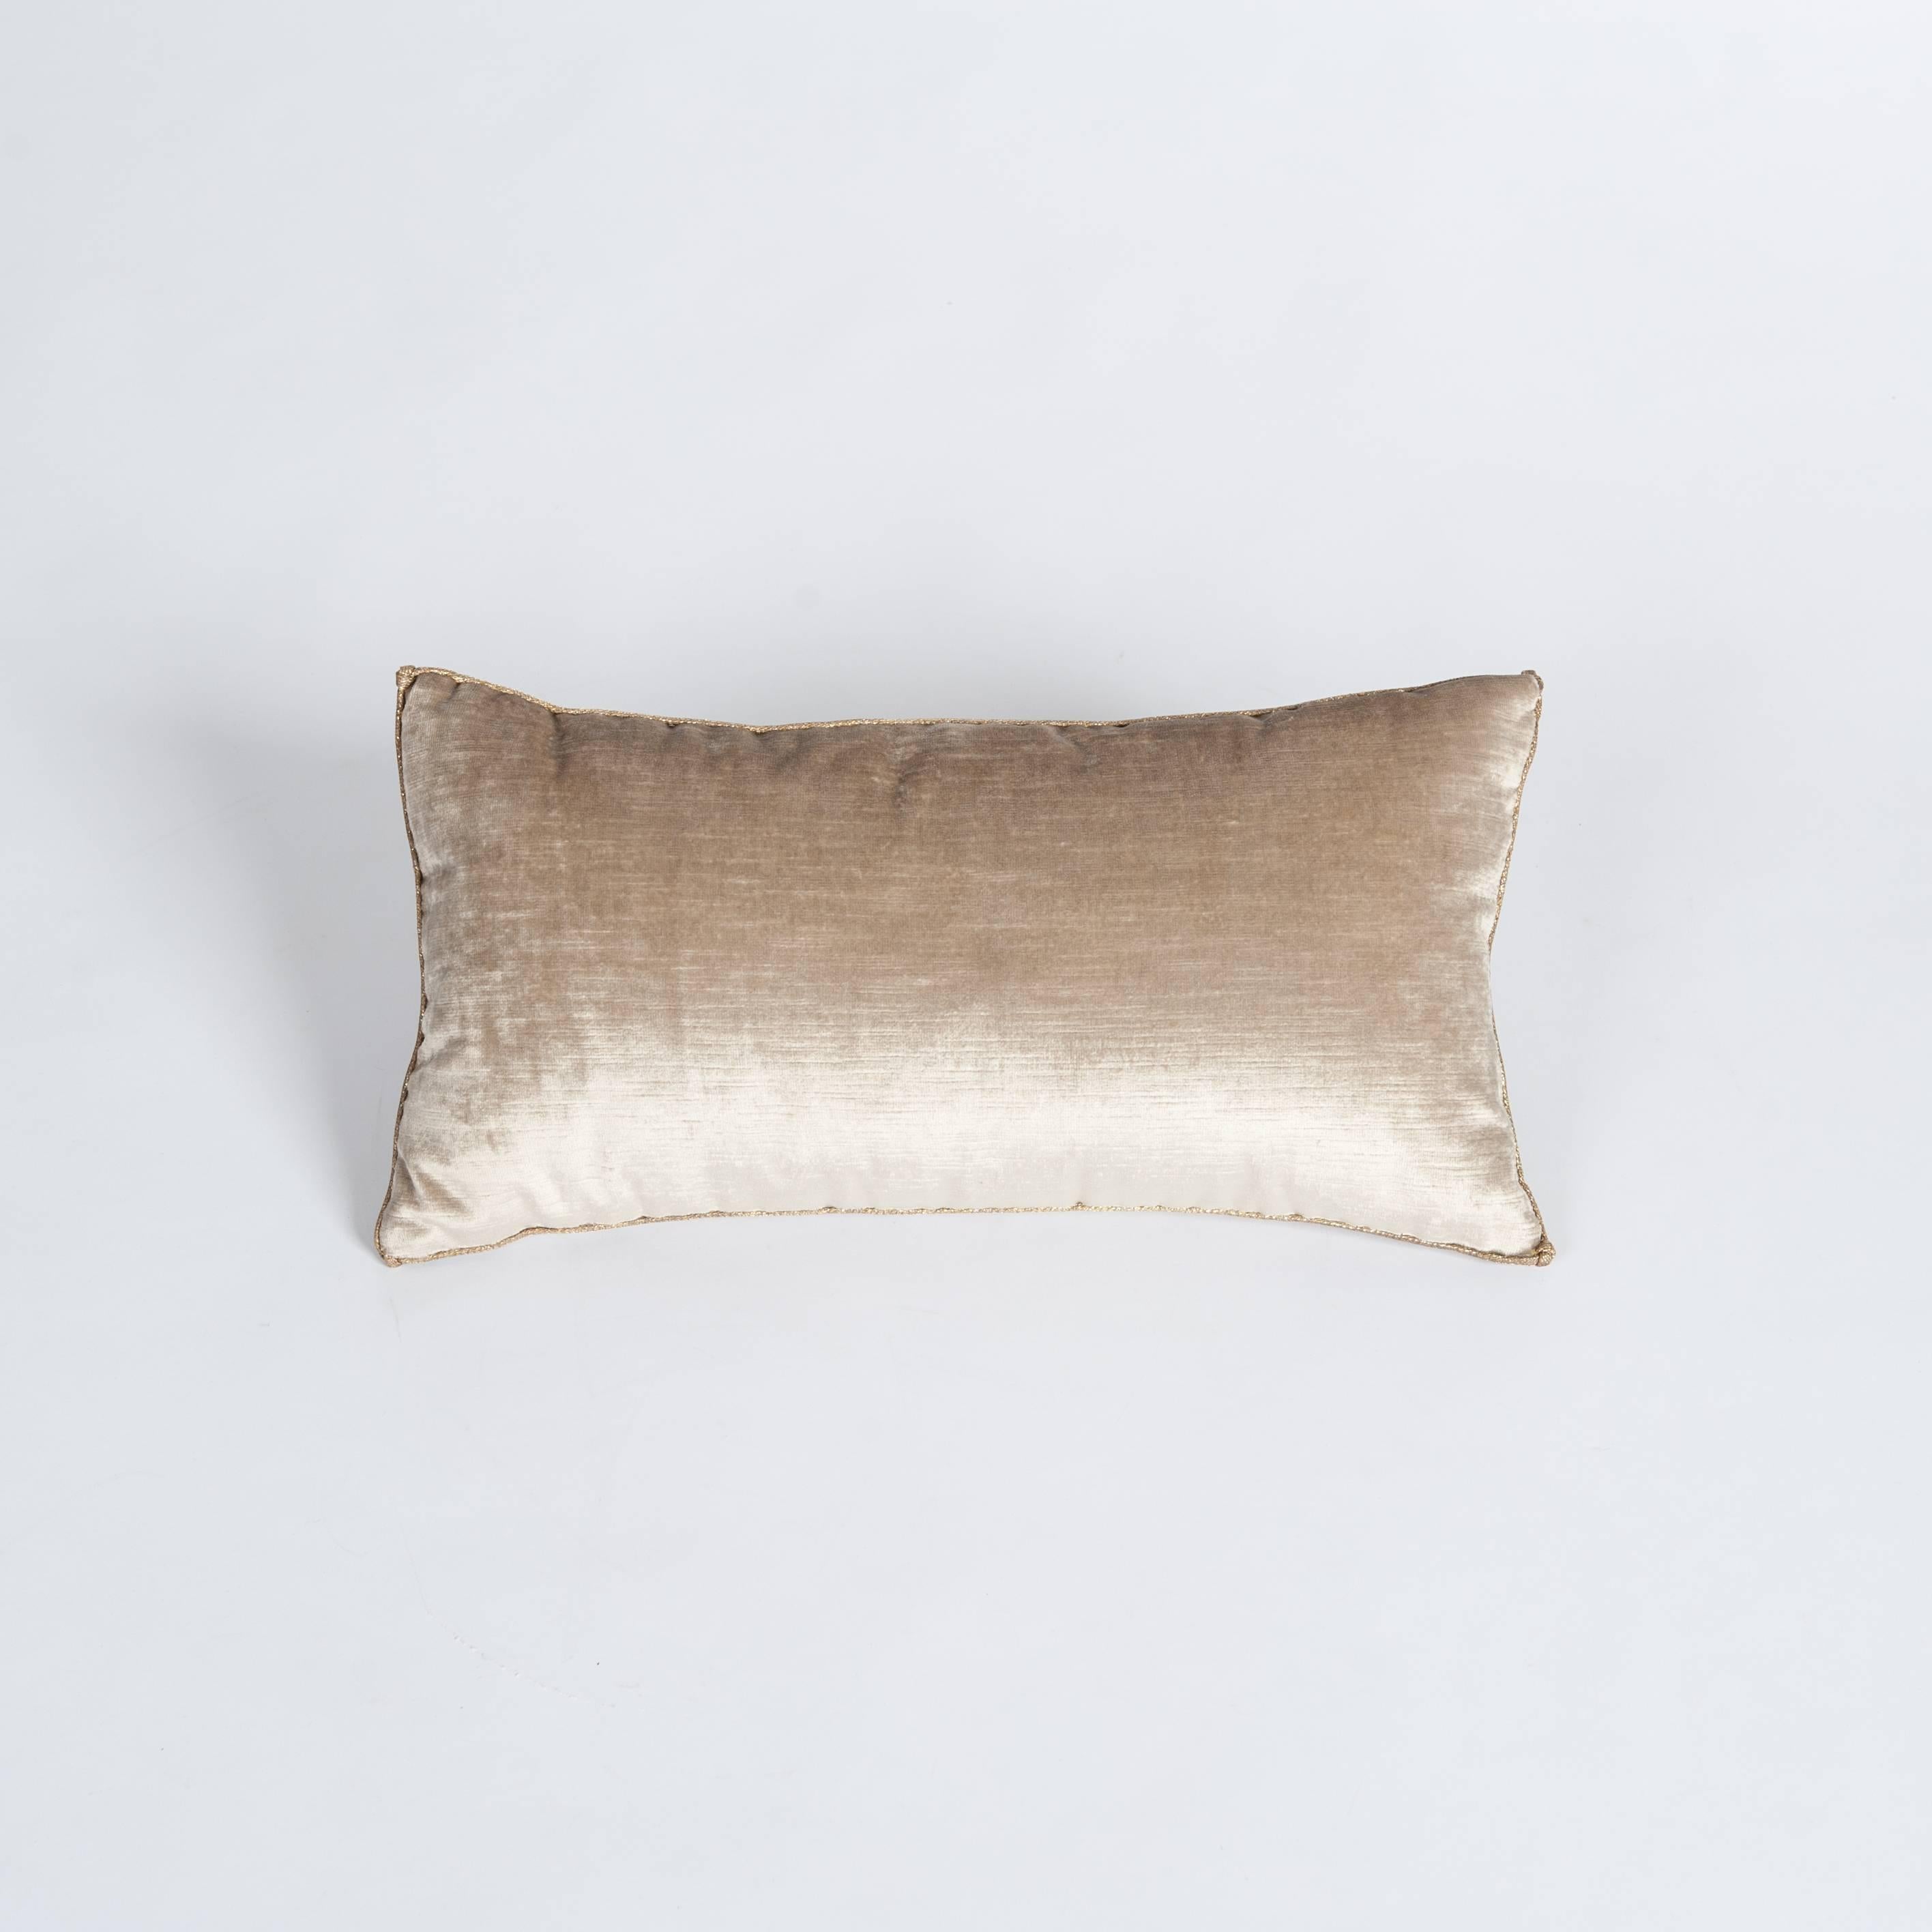 Gold Pair of Champagne-Beige Colored Velvet Pillows with Antique Metallic Embroidery